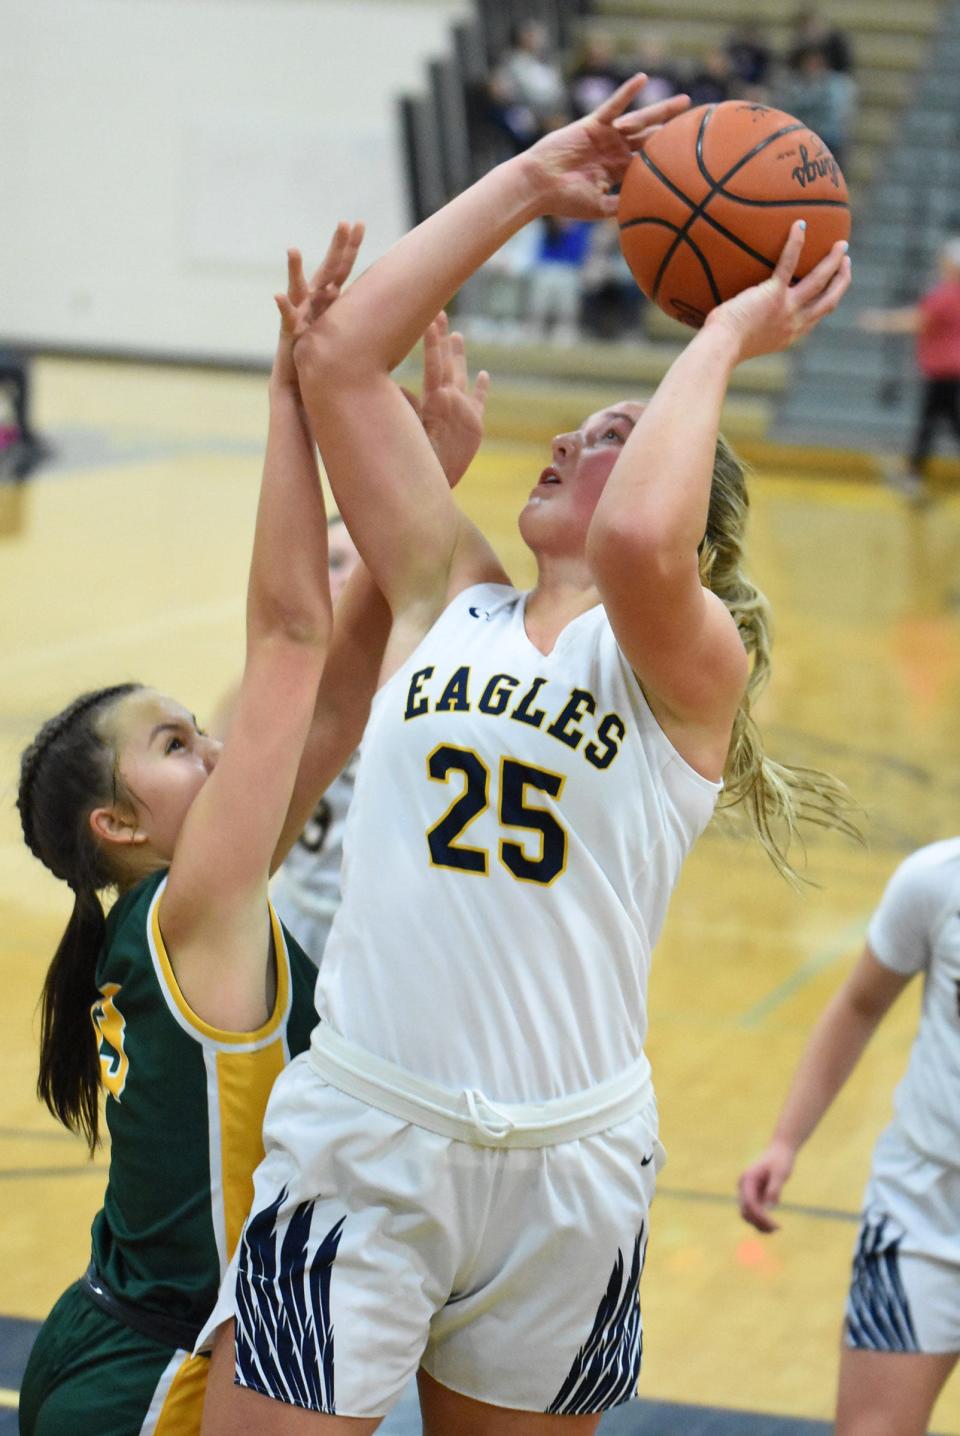 Hartland's Sarah Rekowski (25) had 16 points and 12 rebounds in a 58-50 victory over Howell on Thursday, Dec. 22, 2022.